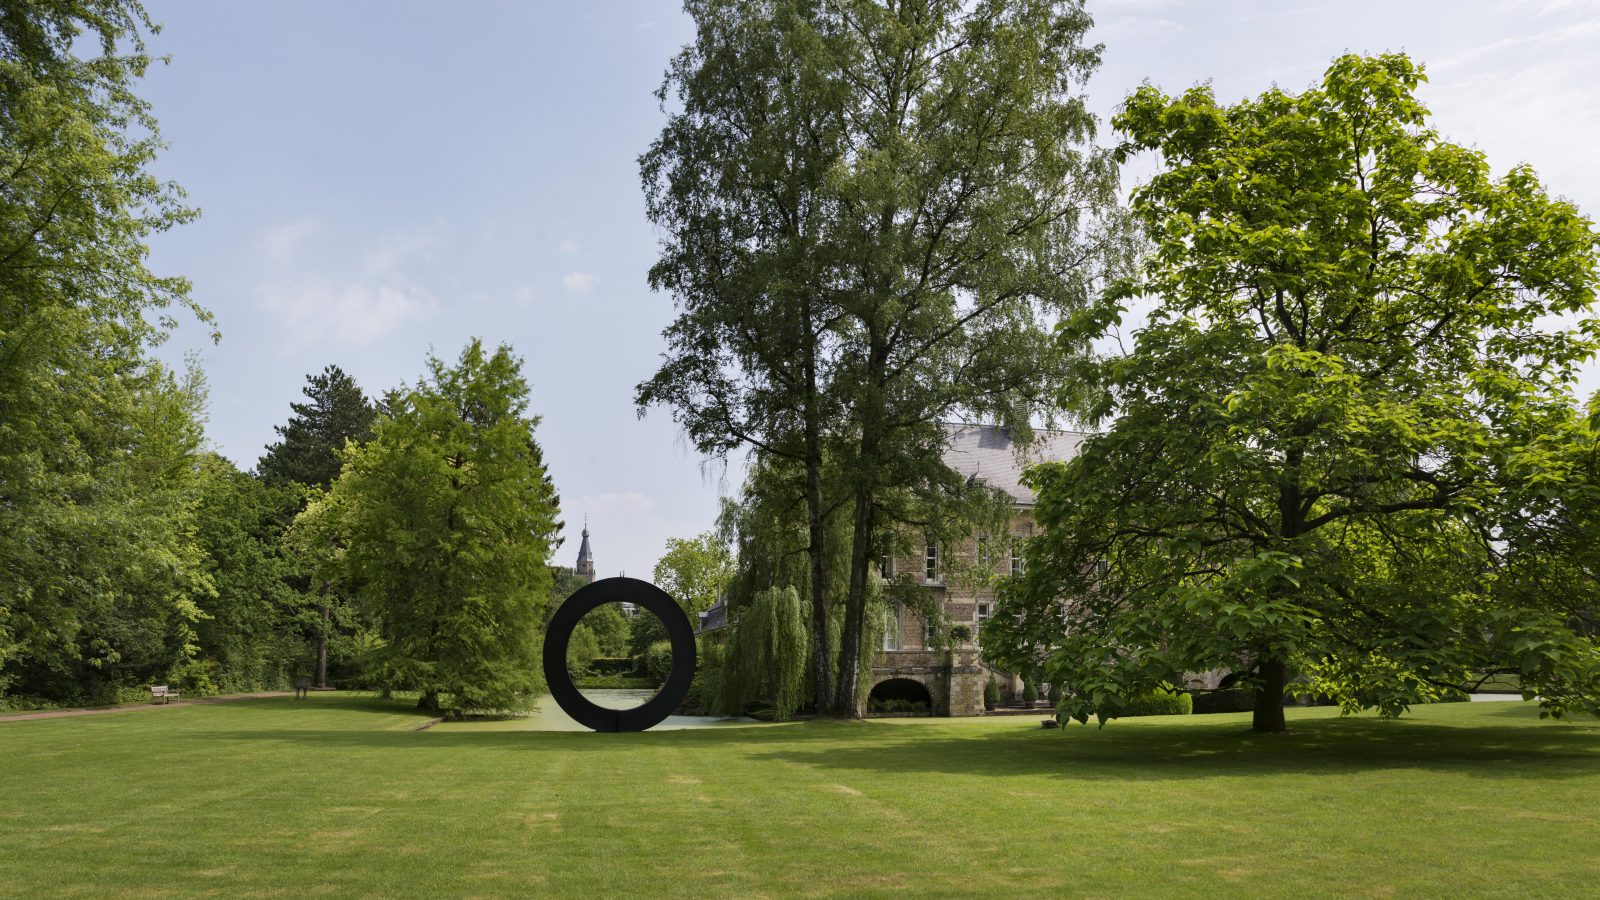 A modern art sculpture at the Kasteel Wijlre estate. The circular sculpture stands on the lawn that surrounds the mansion